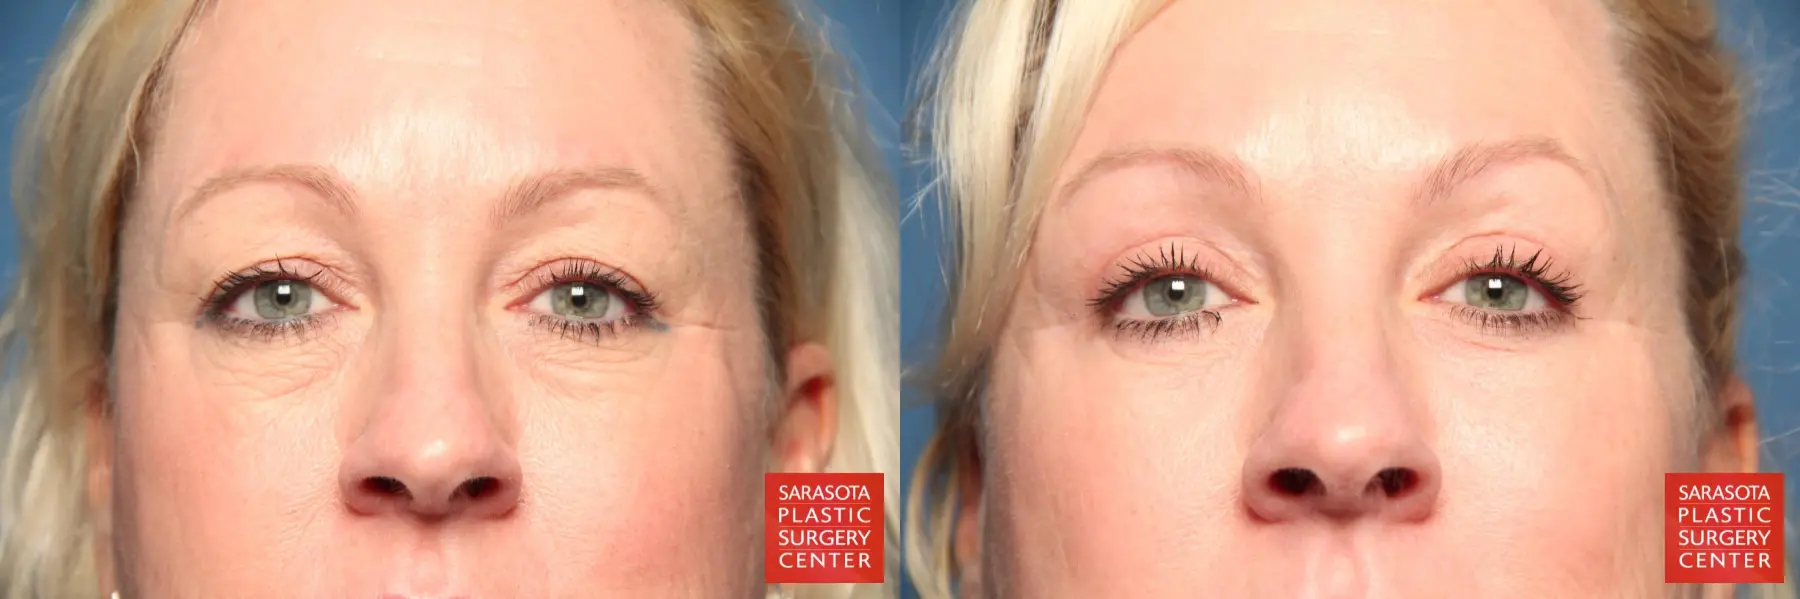 Eyelid Lift: Patient 4 - Before and After 1